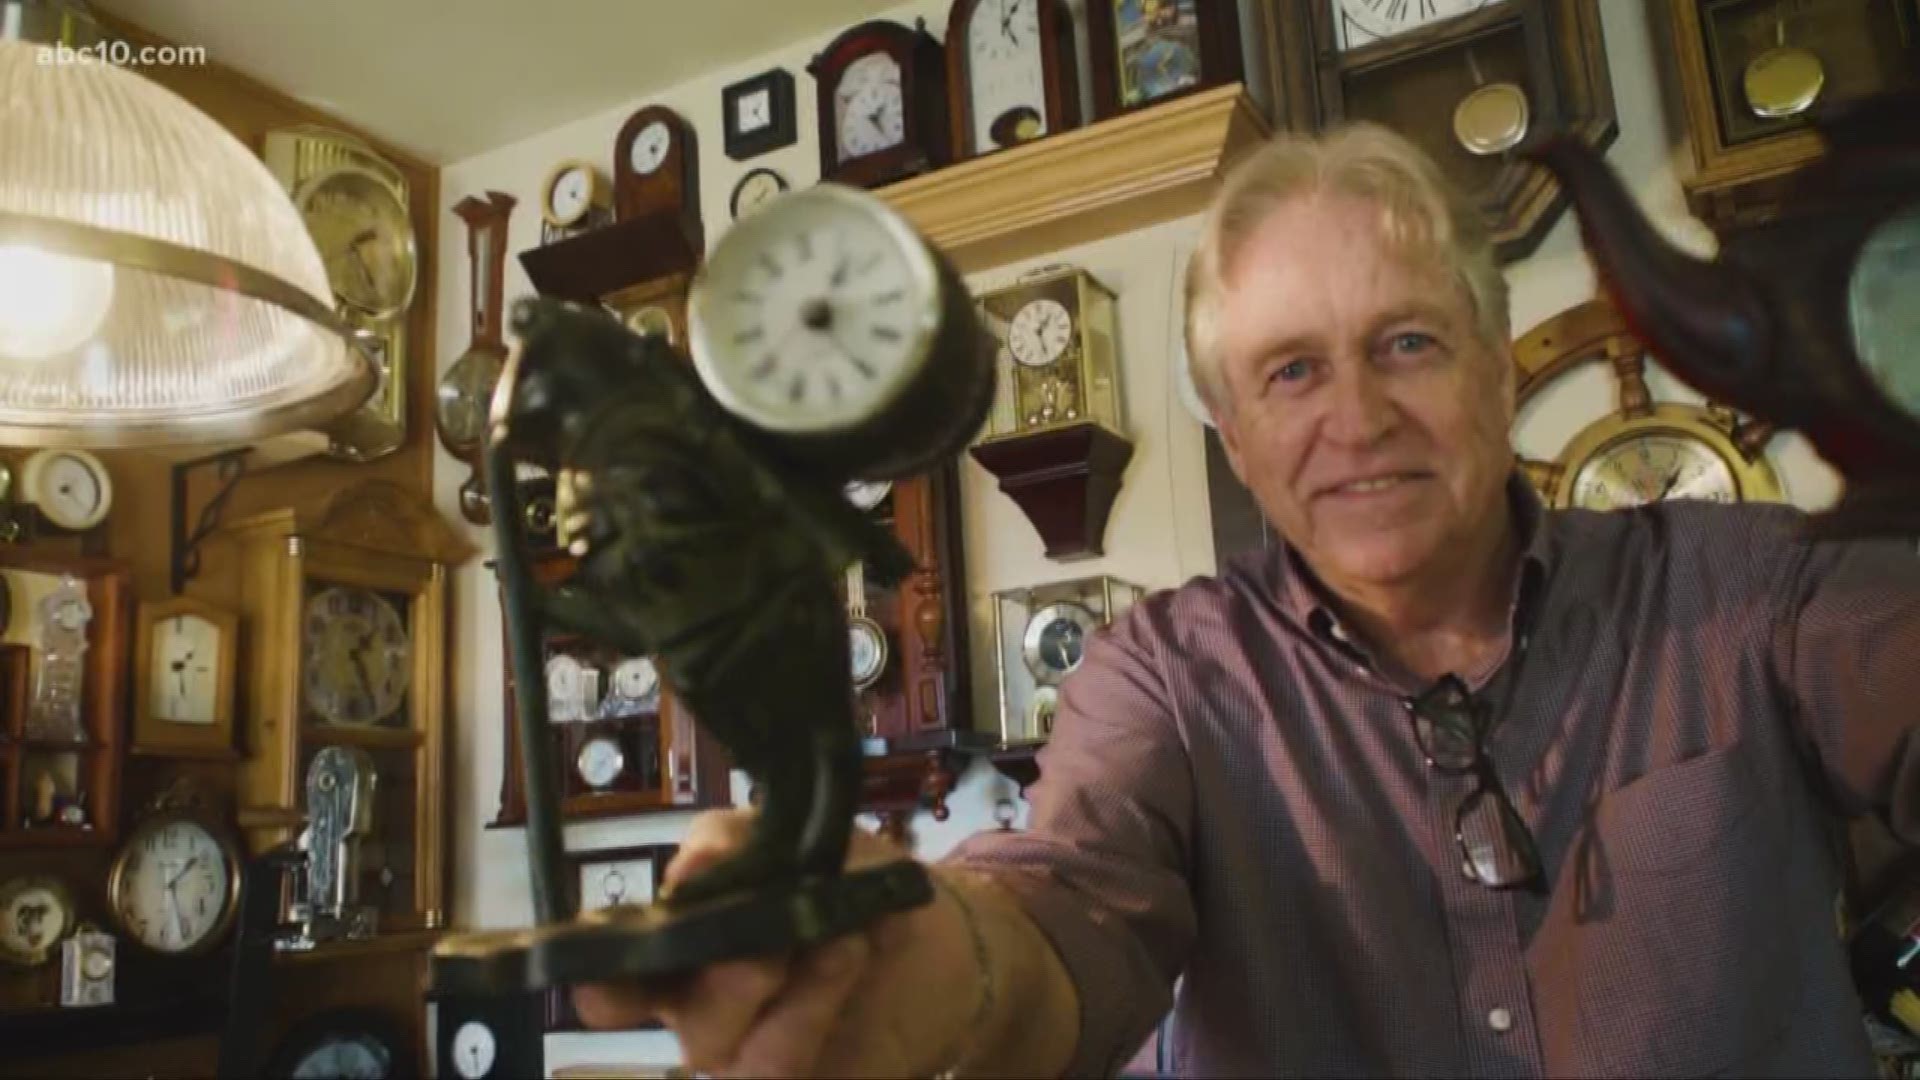 It was time to get a hobby and that's exactly what one Cameron Park man did. They call him the clock man because of his extensive clock collection.